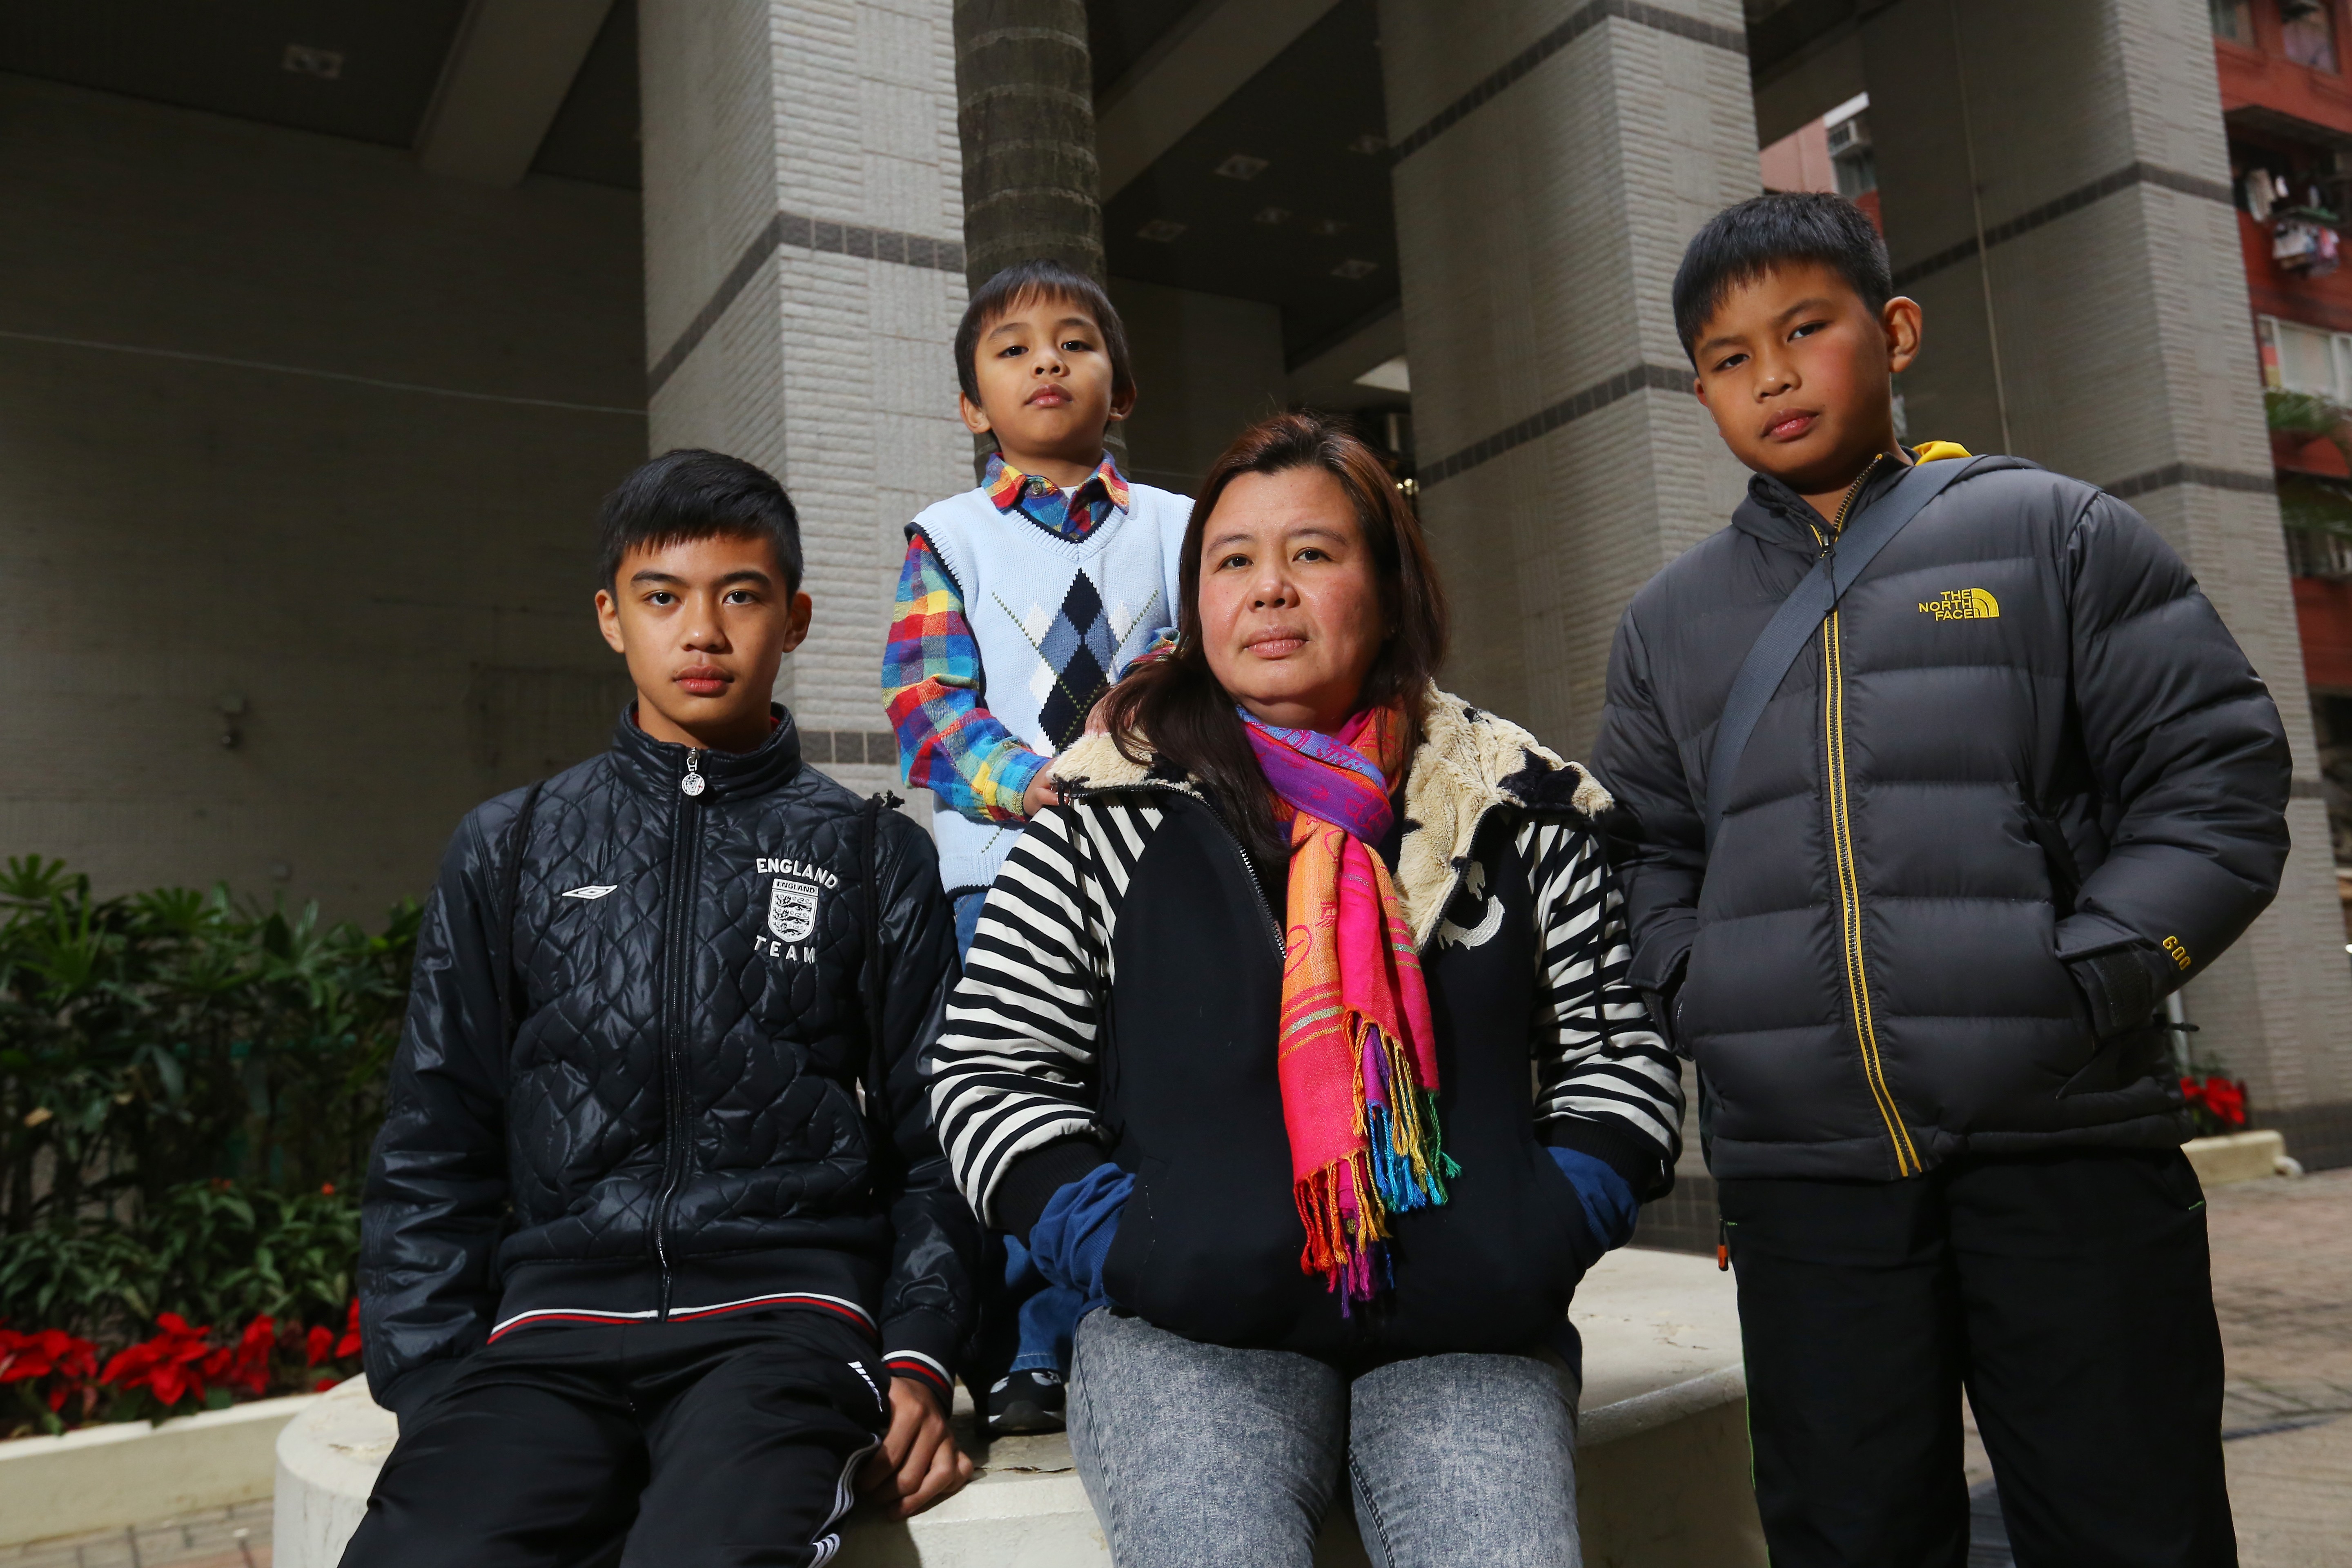 Desiree Rante Luis (centre), who may be separated from her sons (from left) David John, Mark Joelery and Carl Benz. Photo: Edmond So